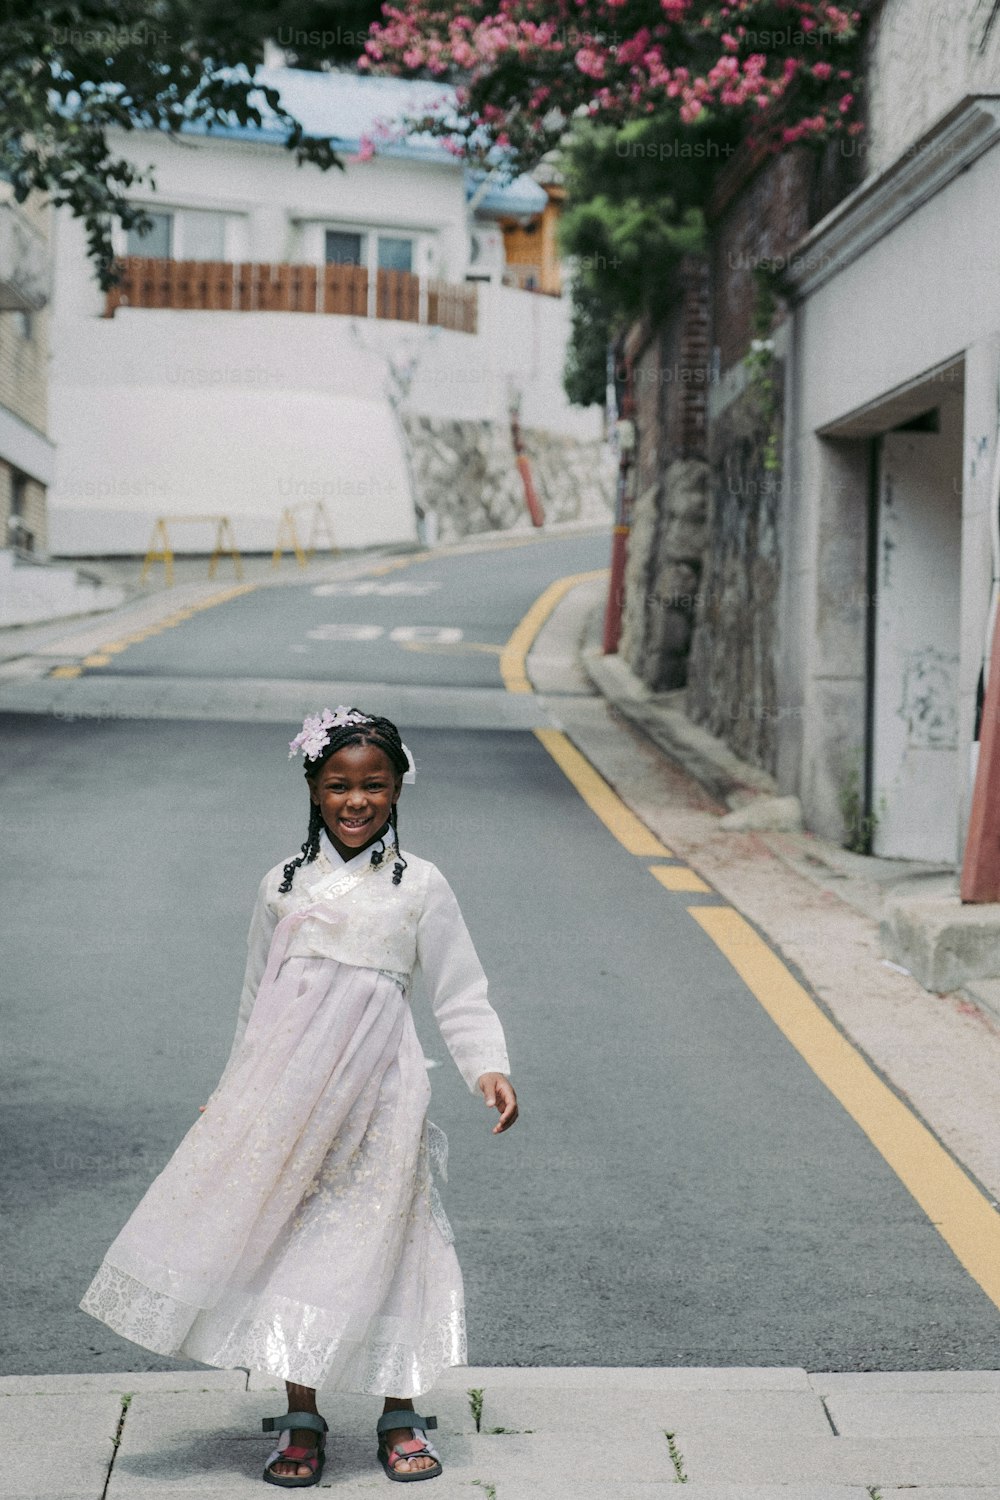 a little girl in a white dress standing on a street